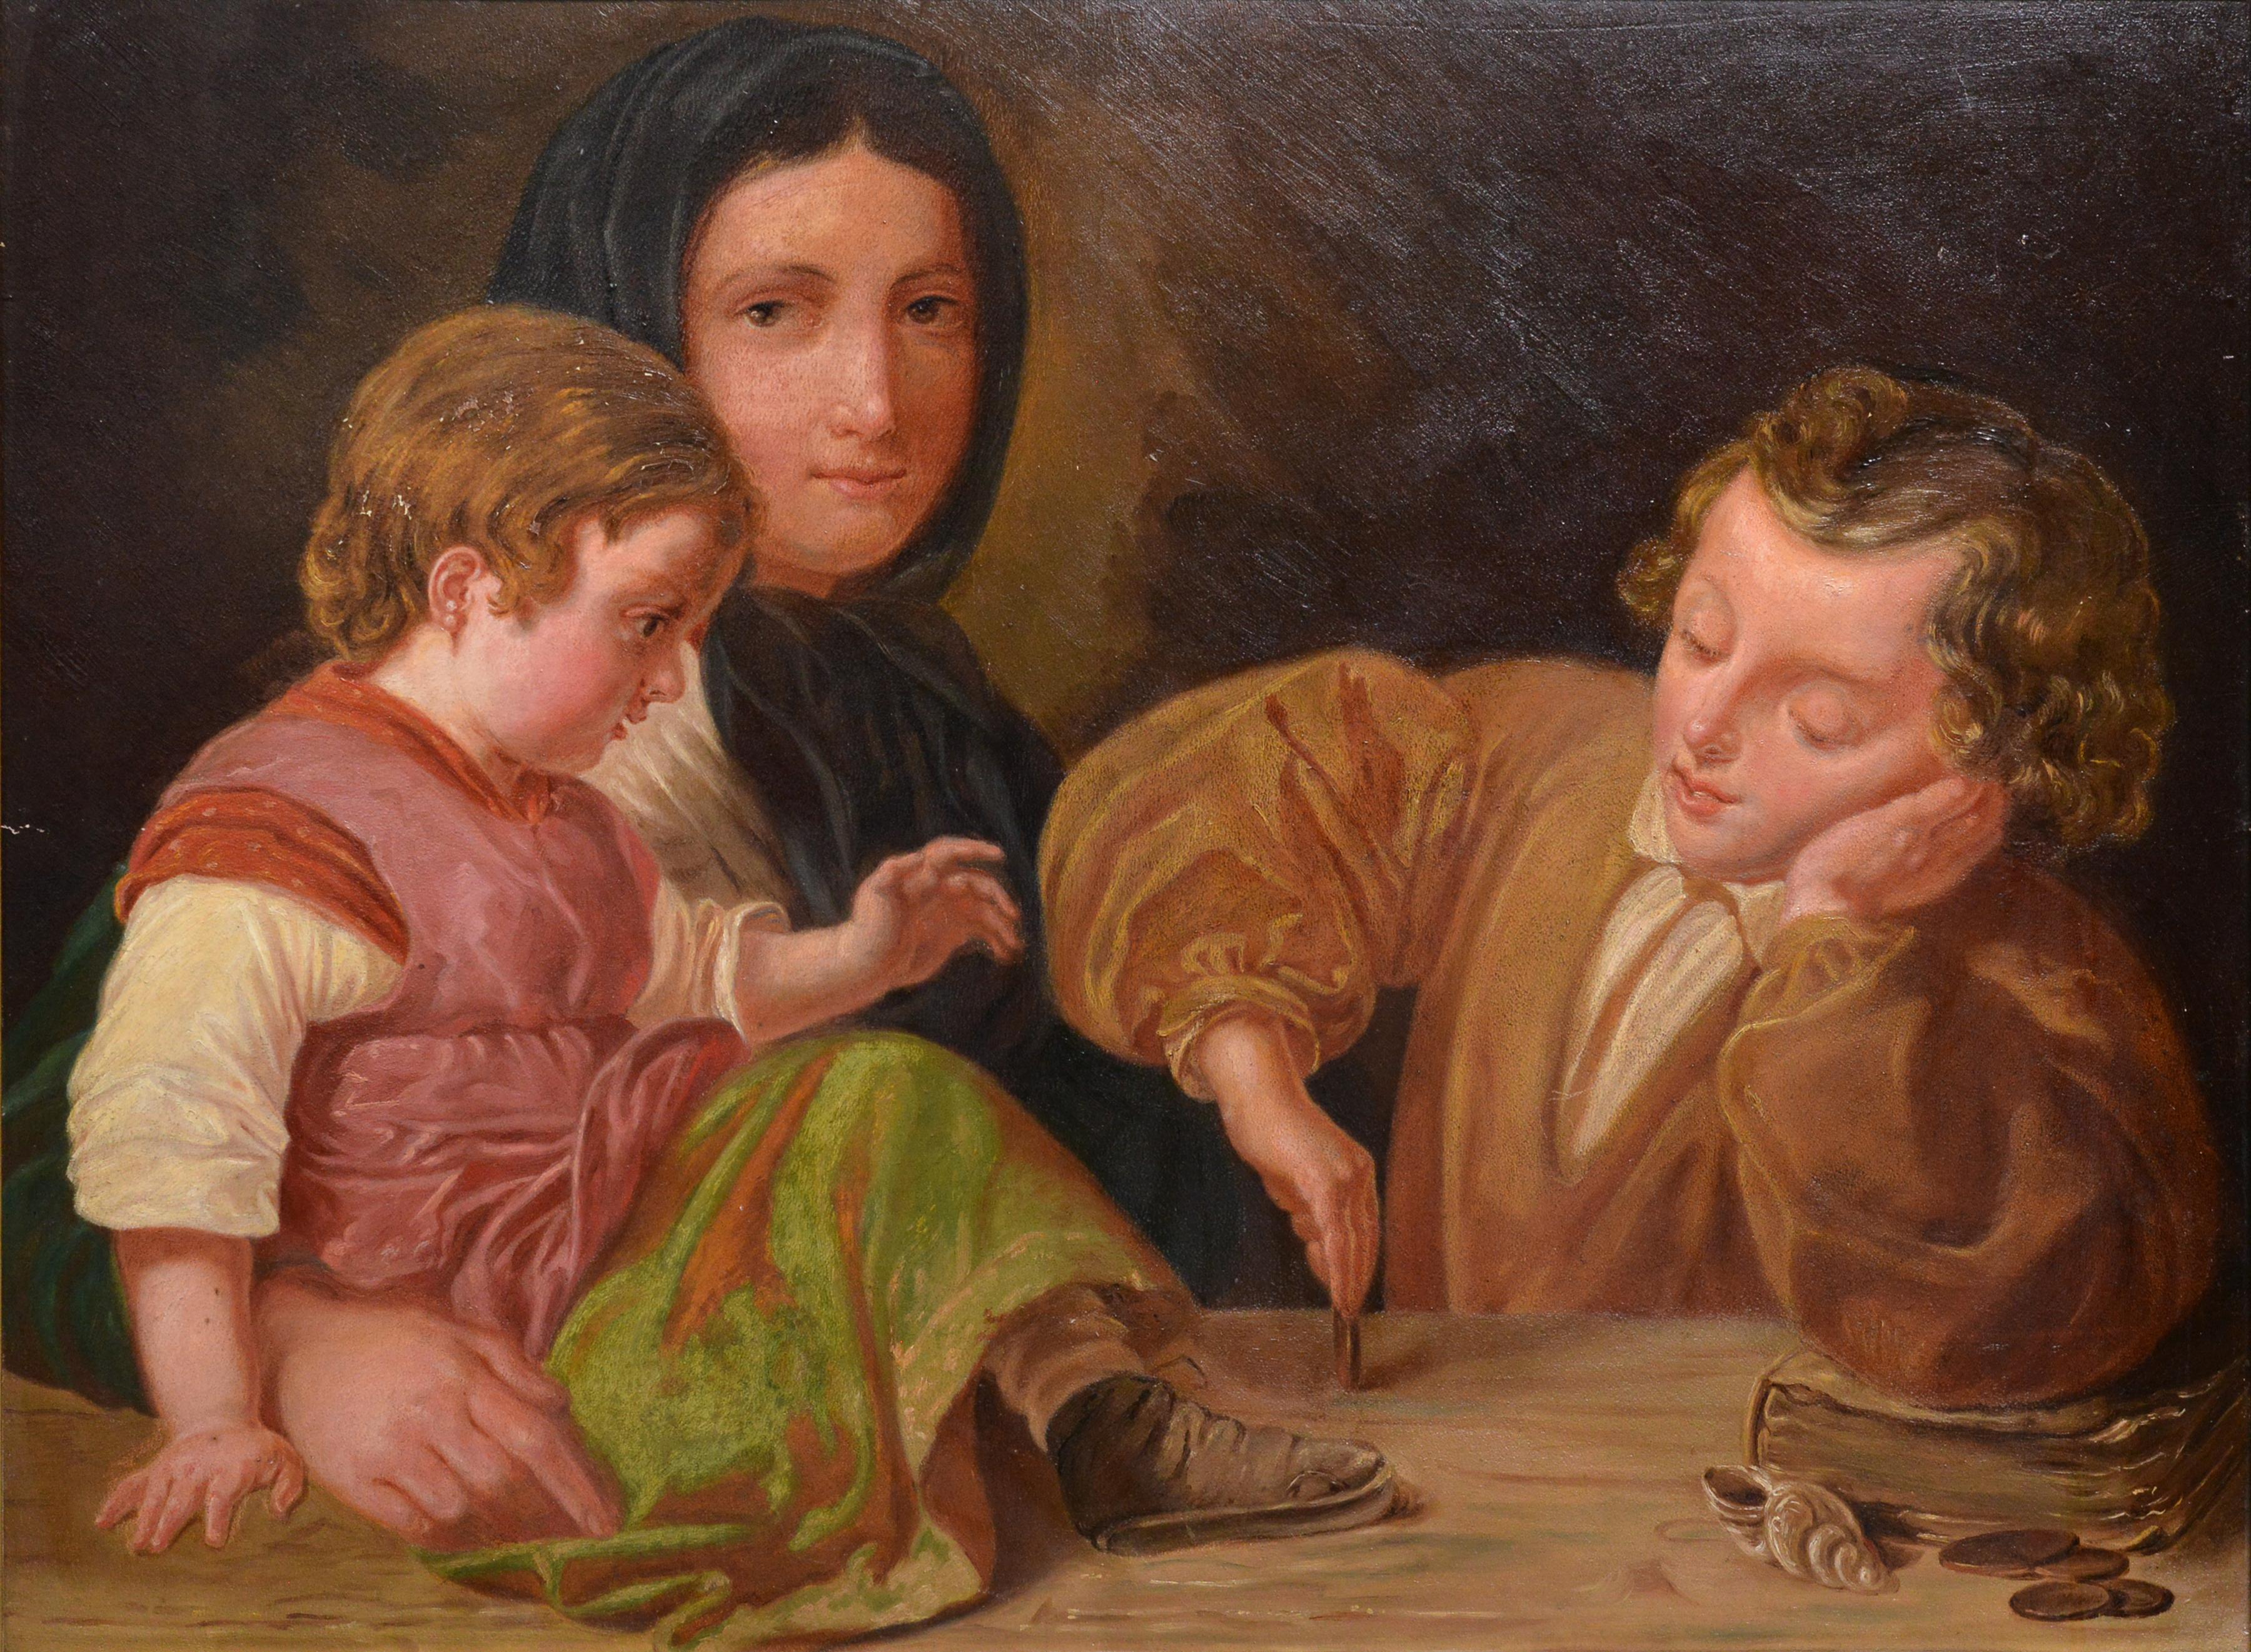 Family genre scene late 19th early 20th century. The boy, tired of posing for a portrait painter, decided to play by spinning a coin on the table, this game greatly impressed his younger sister. Her eyes widen in surprise as she watches the coin